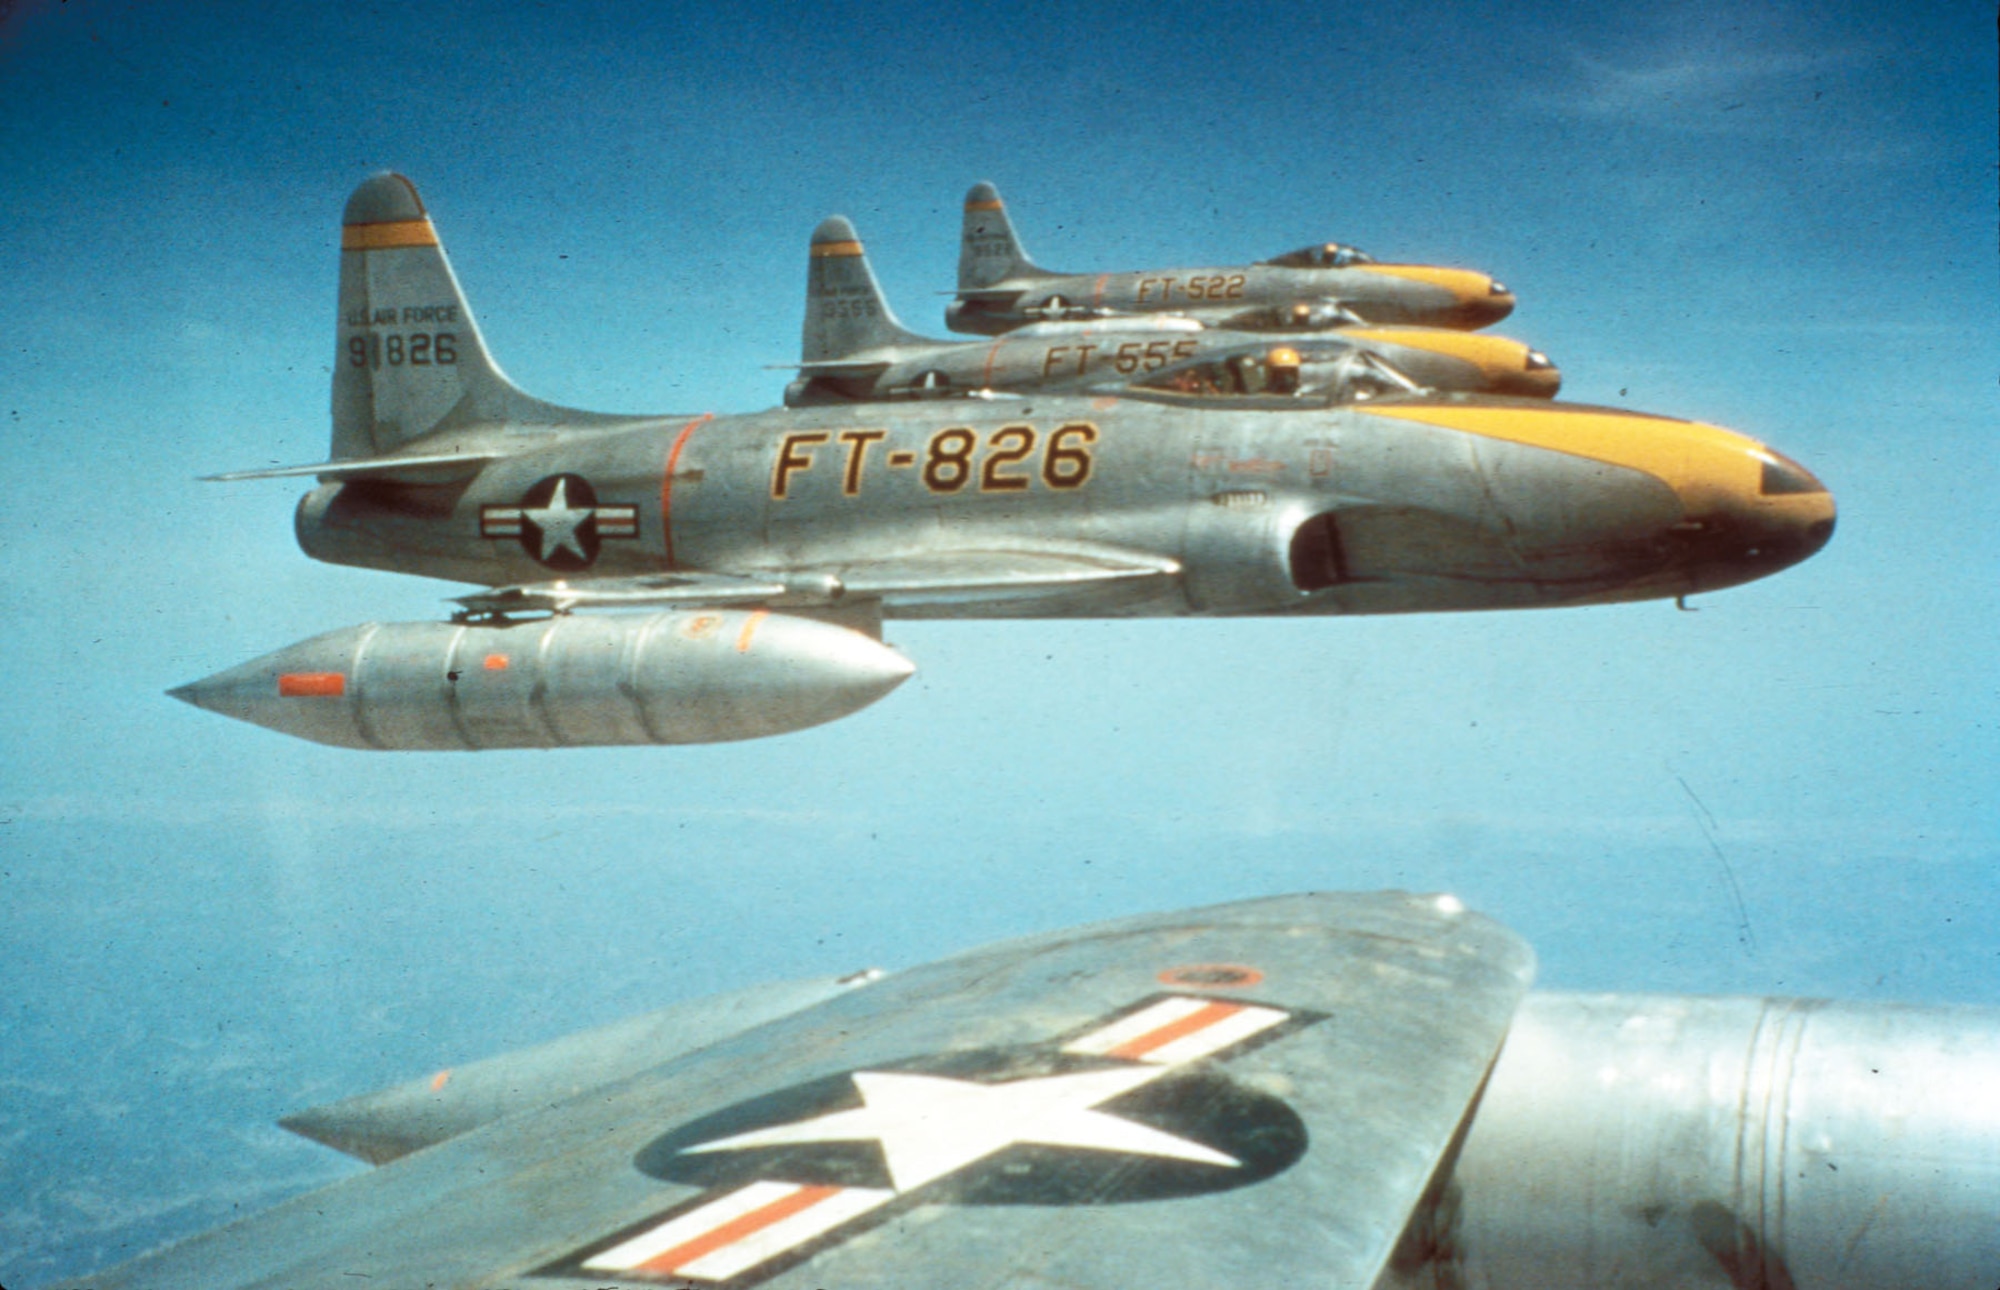 The F-80C was more than a match for the propeller-driven fighters of the North Korean Air Force but suffered from short range when flying from Japanese air bases. (U.S. Air Force photo)